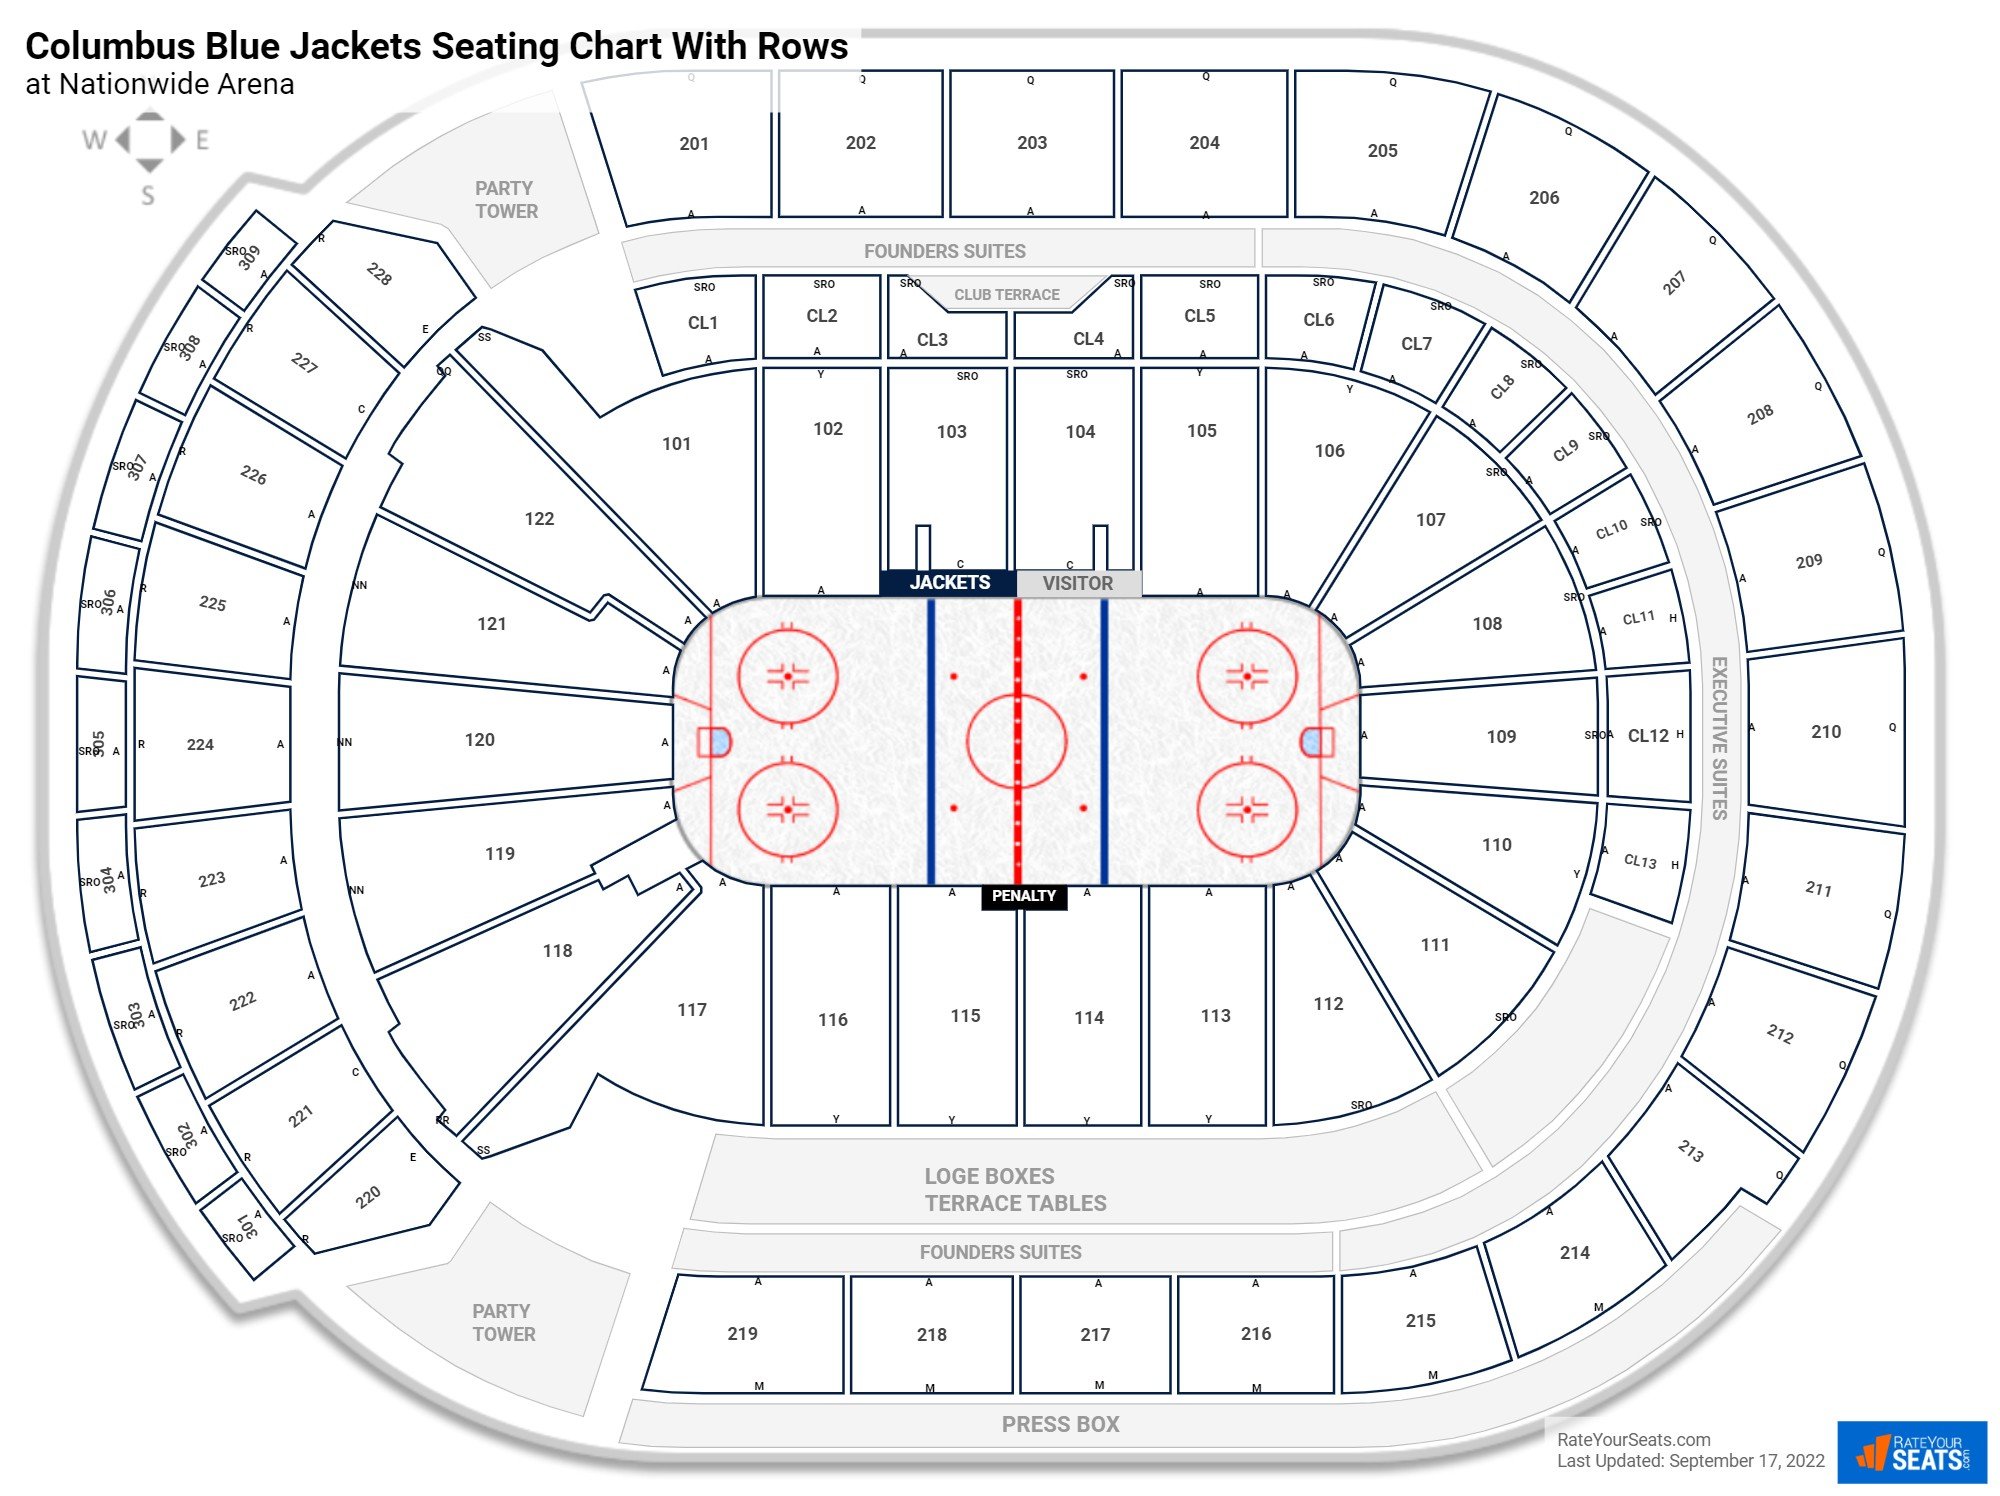 Nationwide Arena seating chart with row numbers